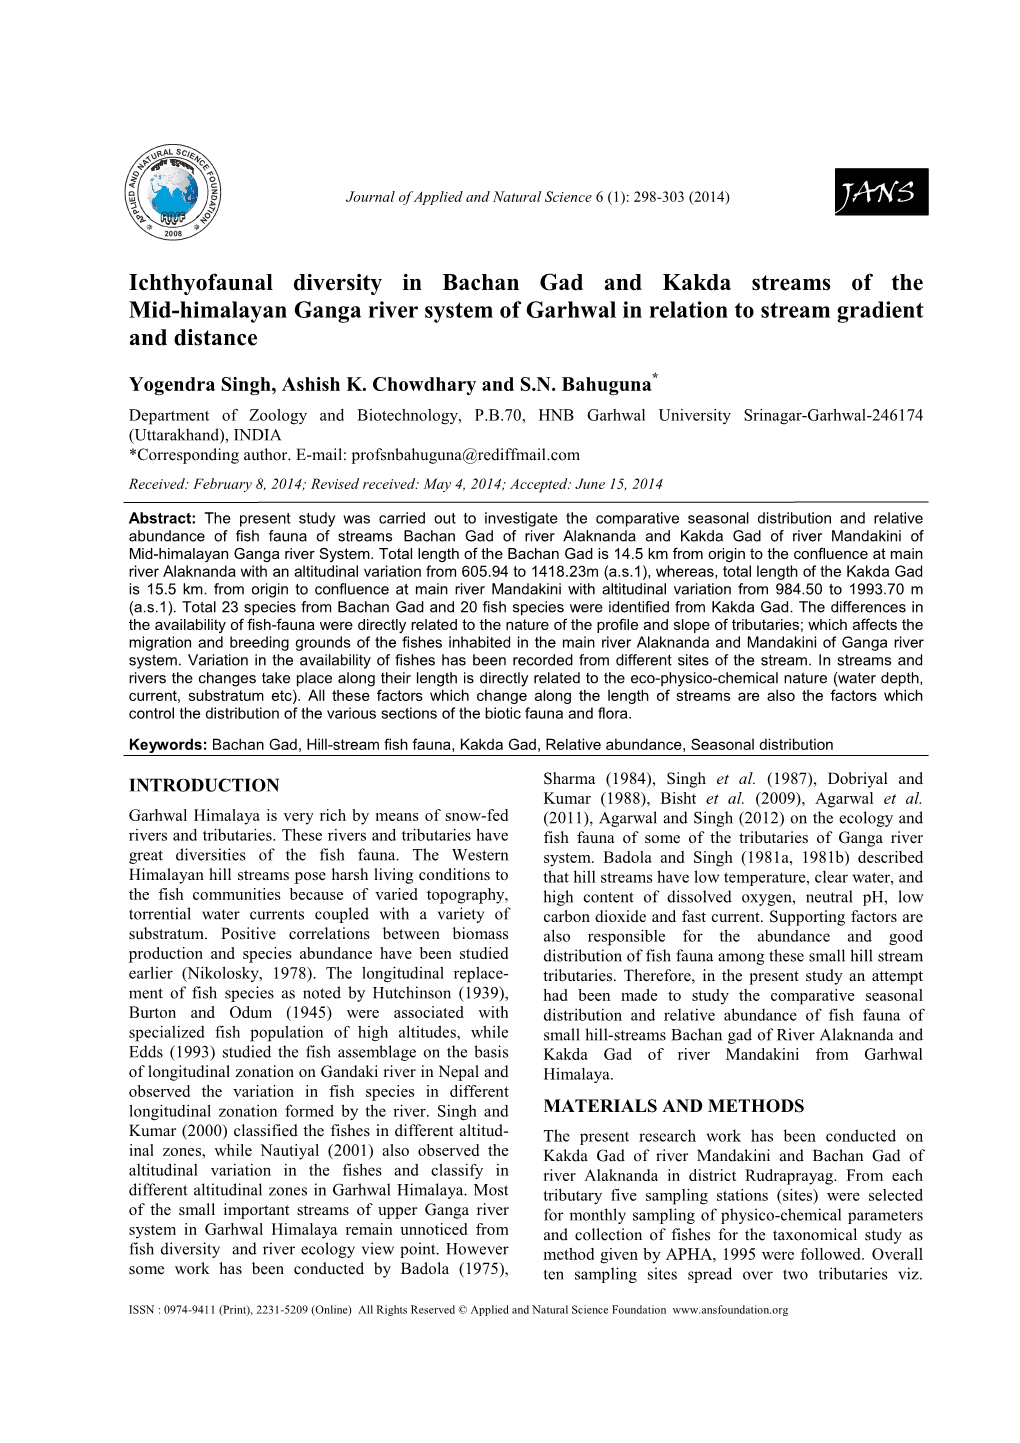 Ichthyofaunal Diversity in Bachan Gad and Kakda Streams of the Mid-Himalayan Ganga River System of Garhwal in Relation to Stream Gradient and Distance